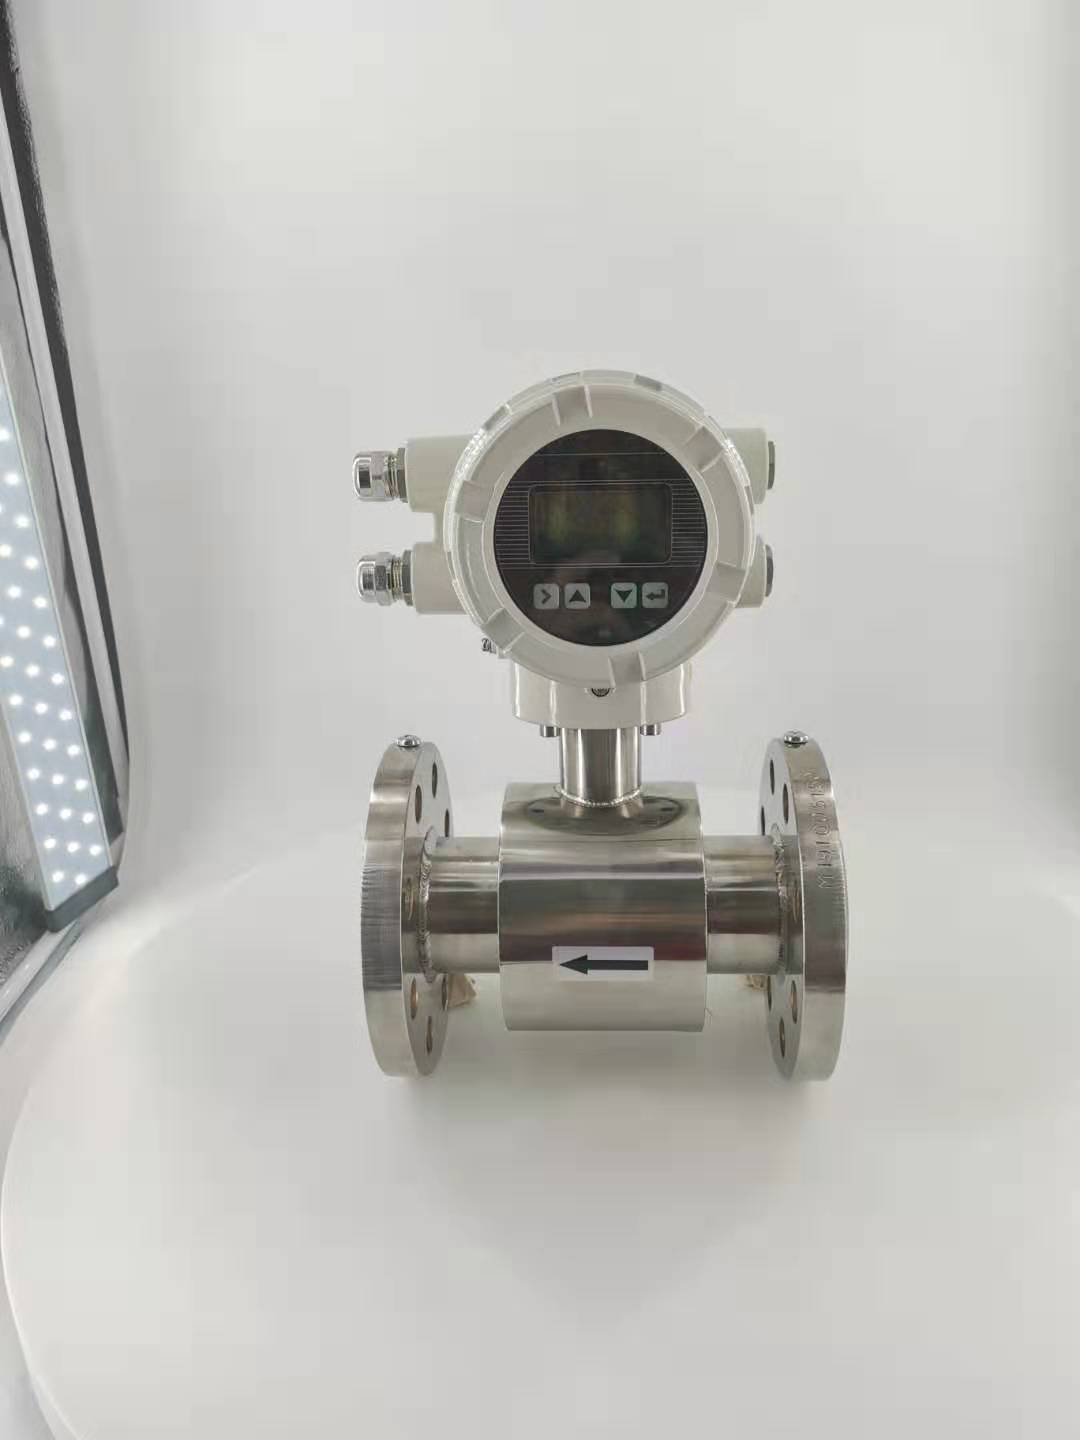 To accurately measure the electromagnetic flowmeter, it is very important to avoid five kinds of environments